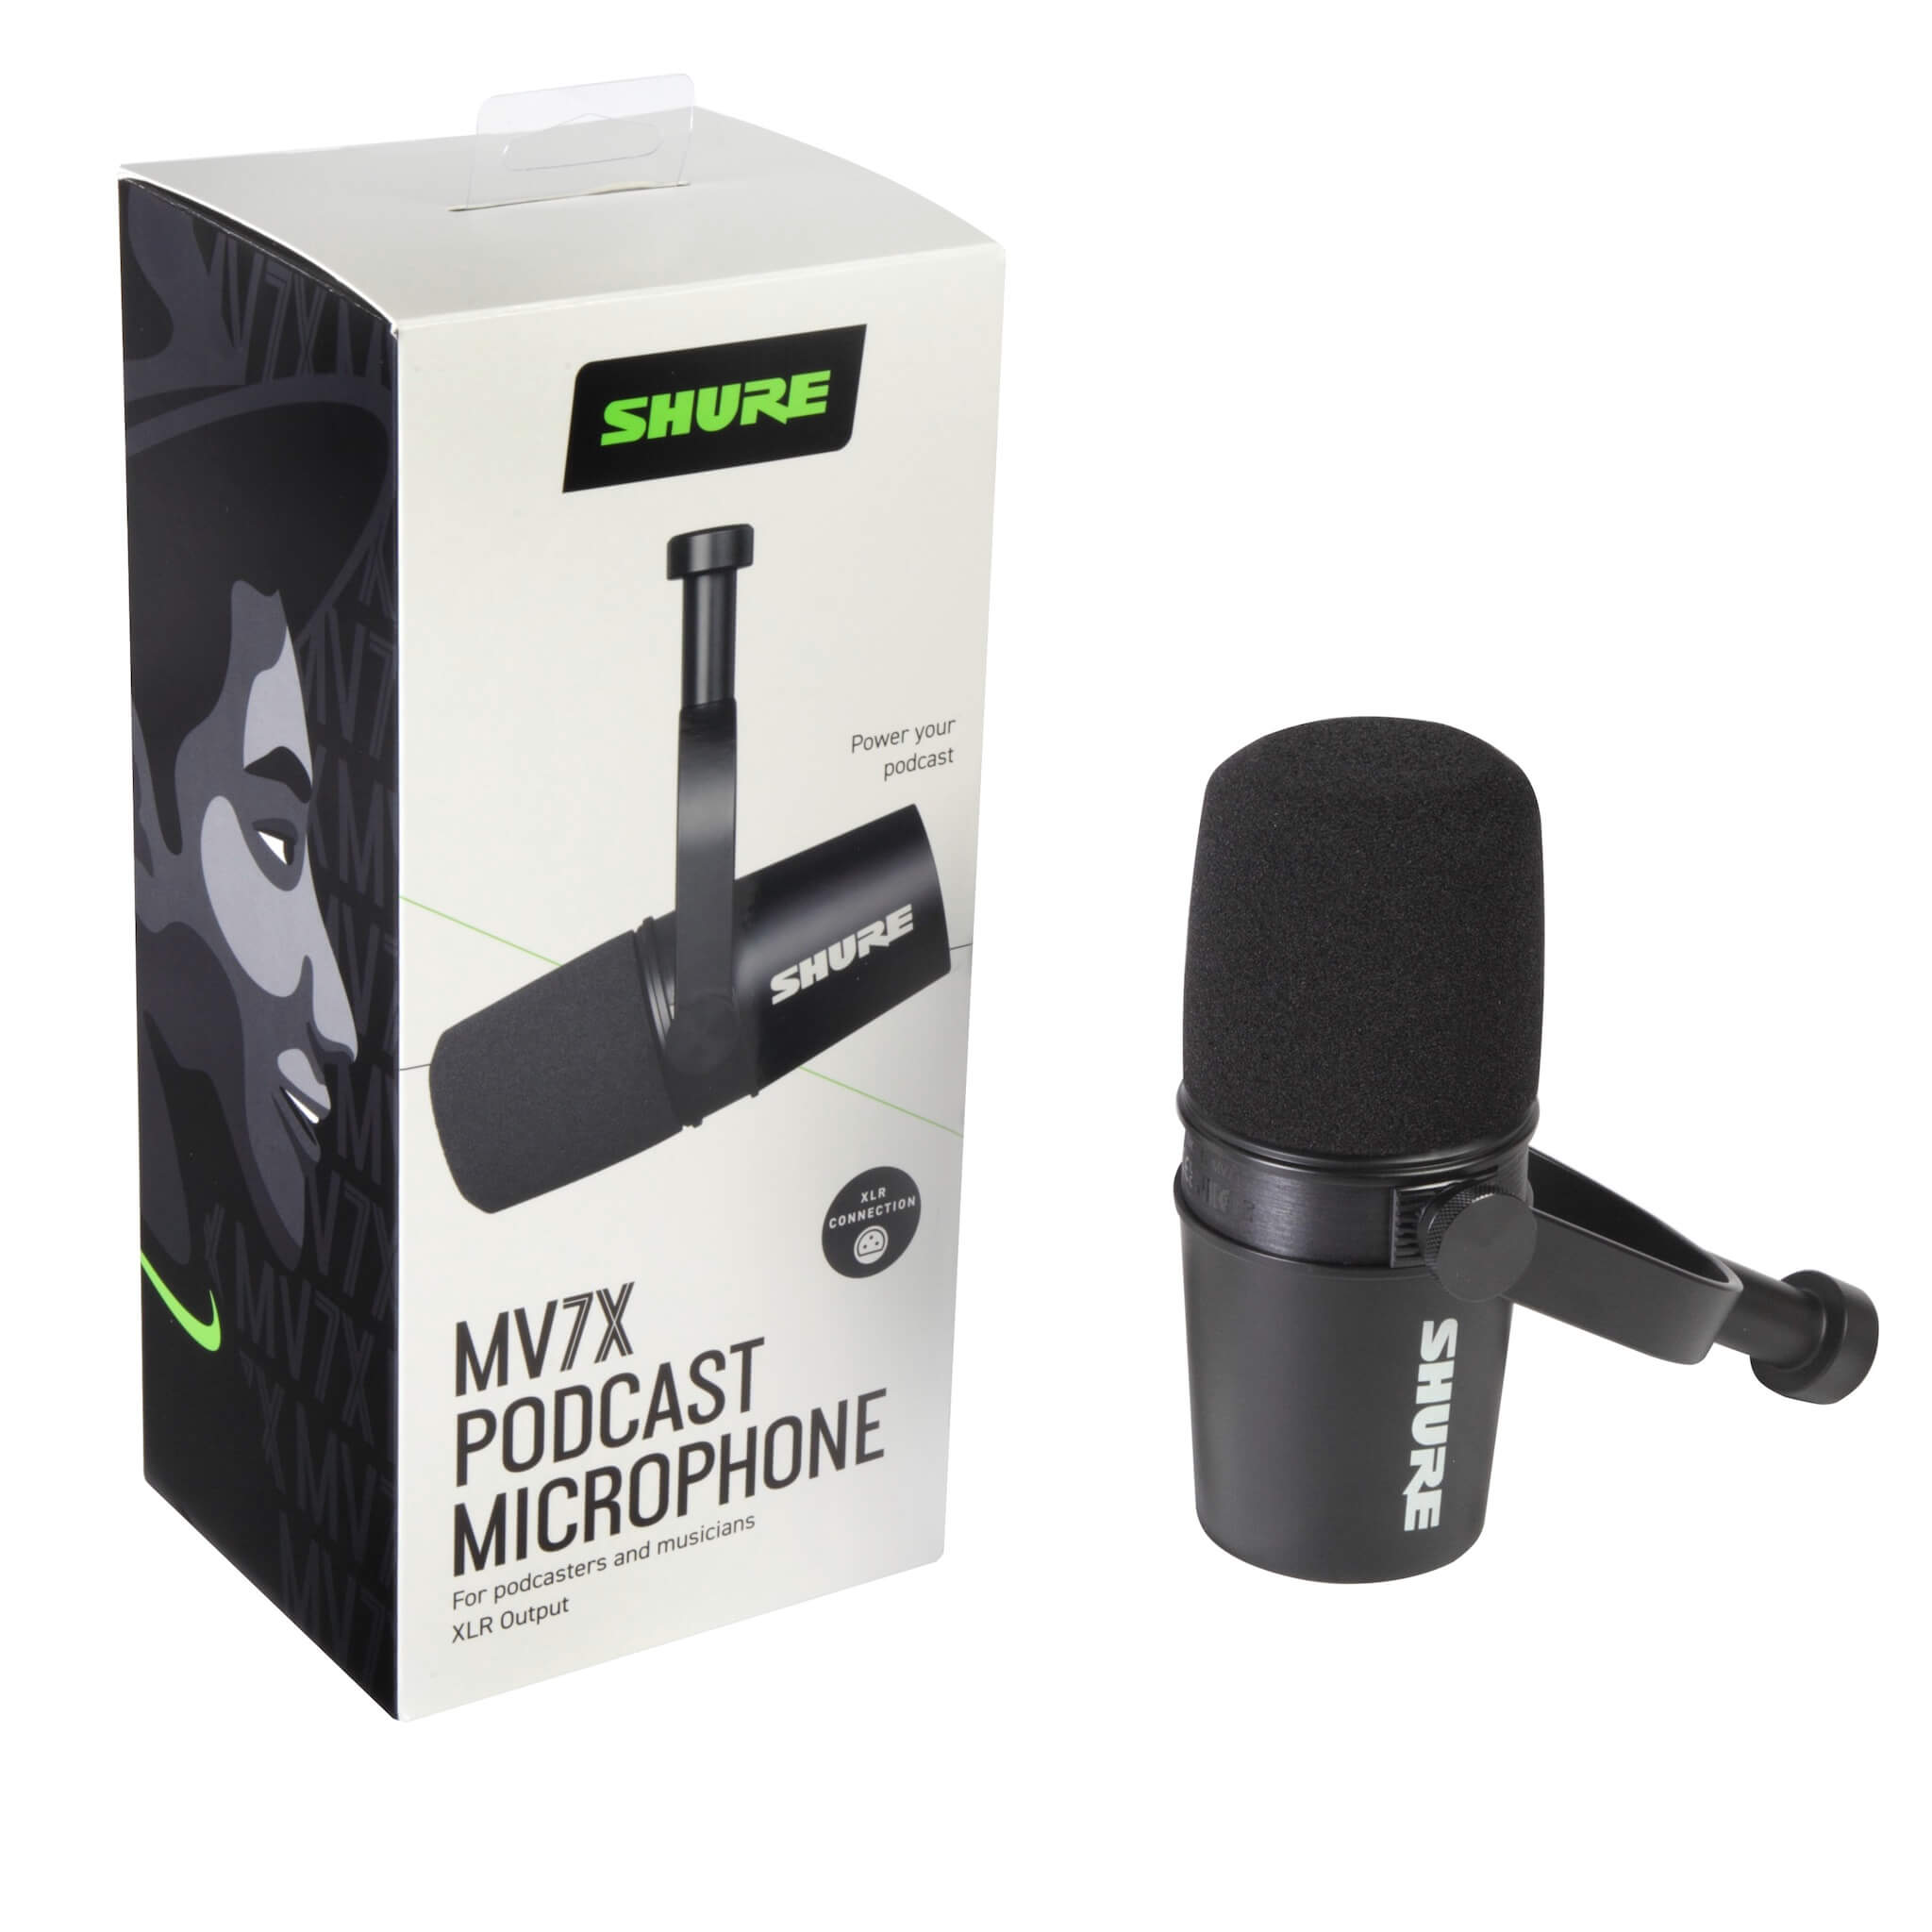 Shure MV7X - Podcast Microphone with XLR Output, box contents